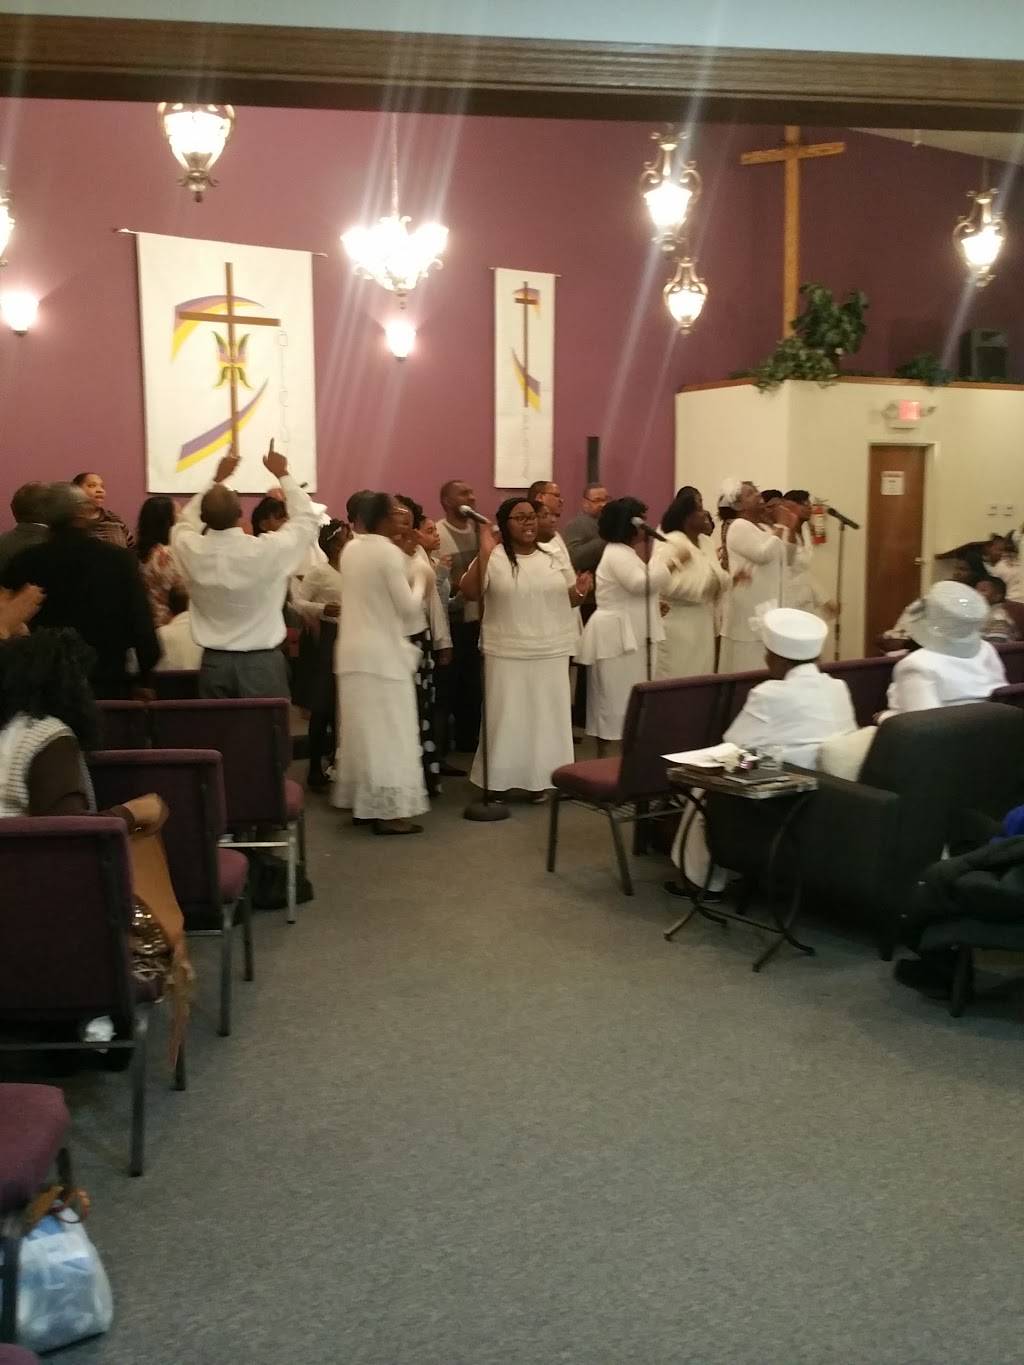 True Church of the First Born | 231 E Meinecke Ave, Milwaukee, WI 53212 | Phone: (414) 264-6620